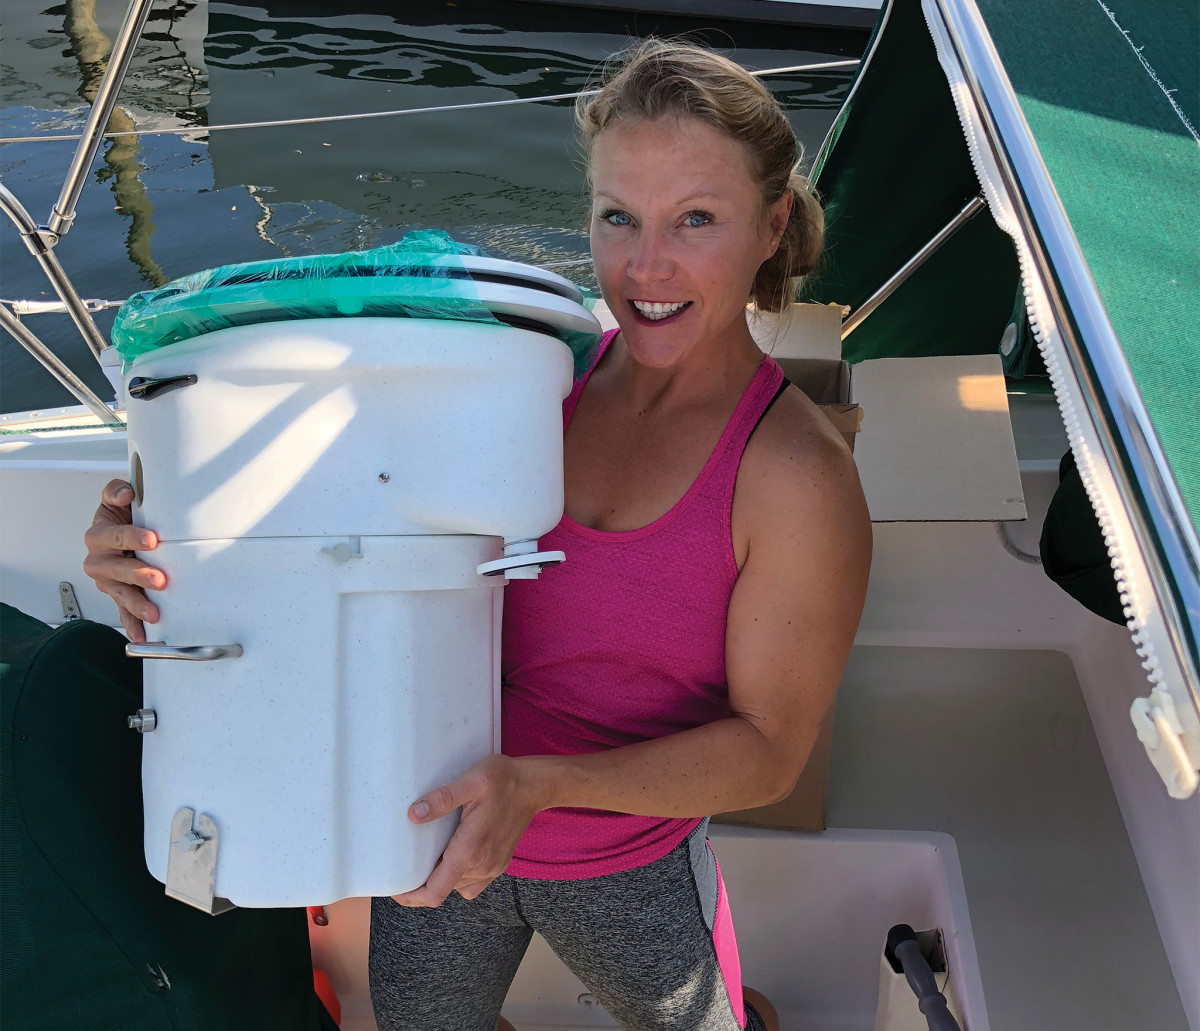 The author prepares to install her boat’s new “throne”